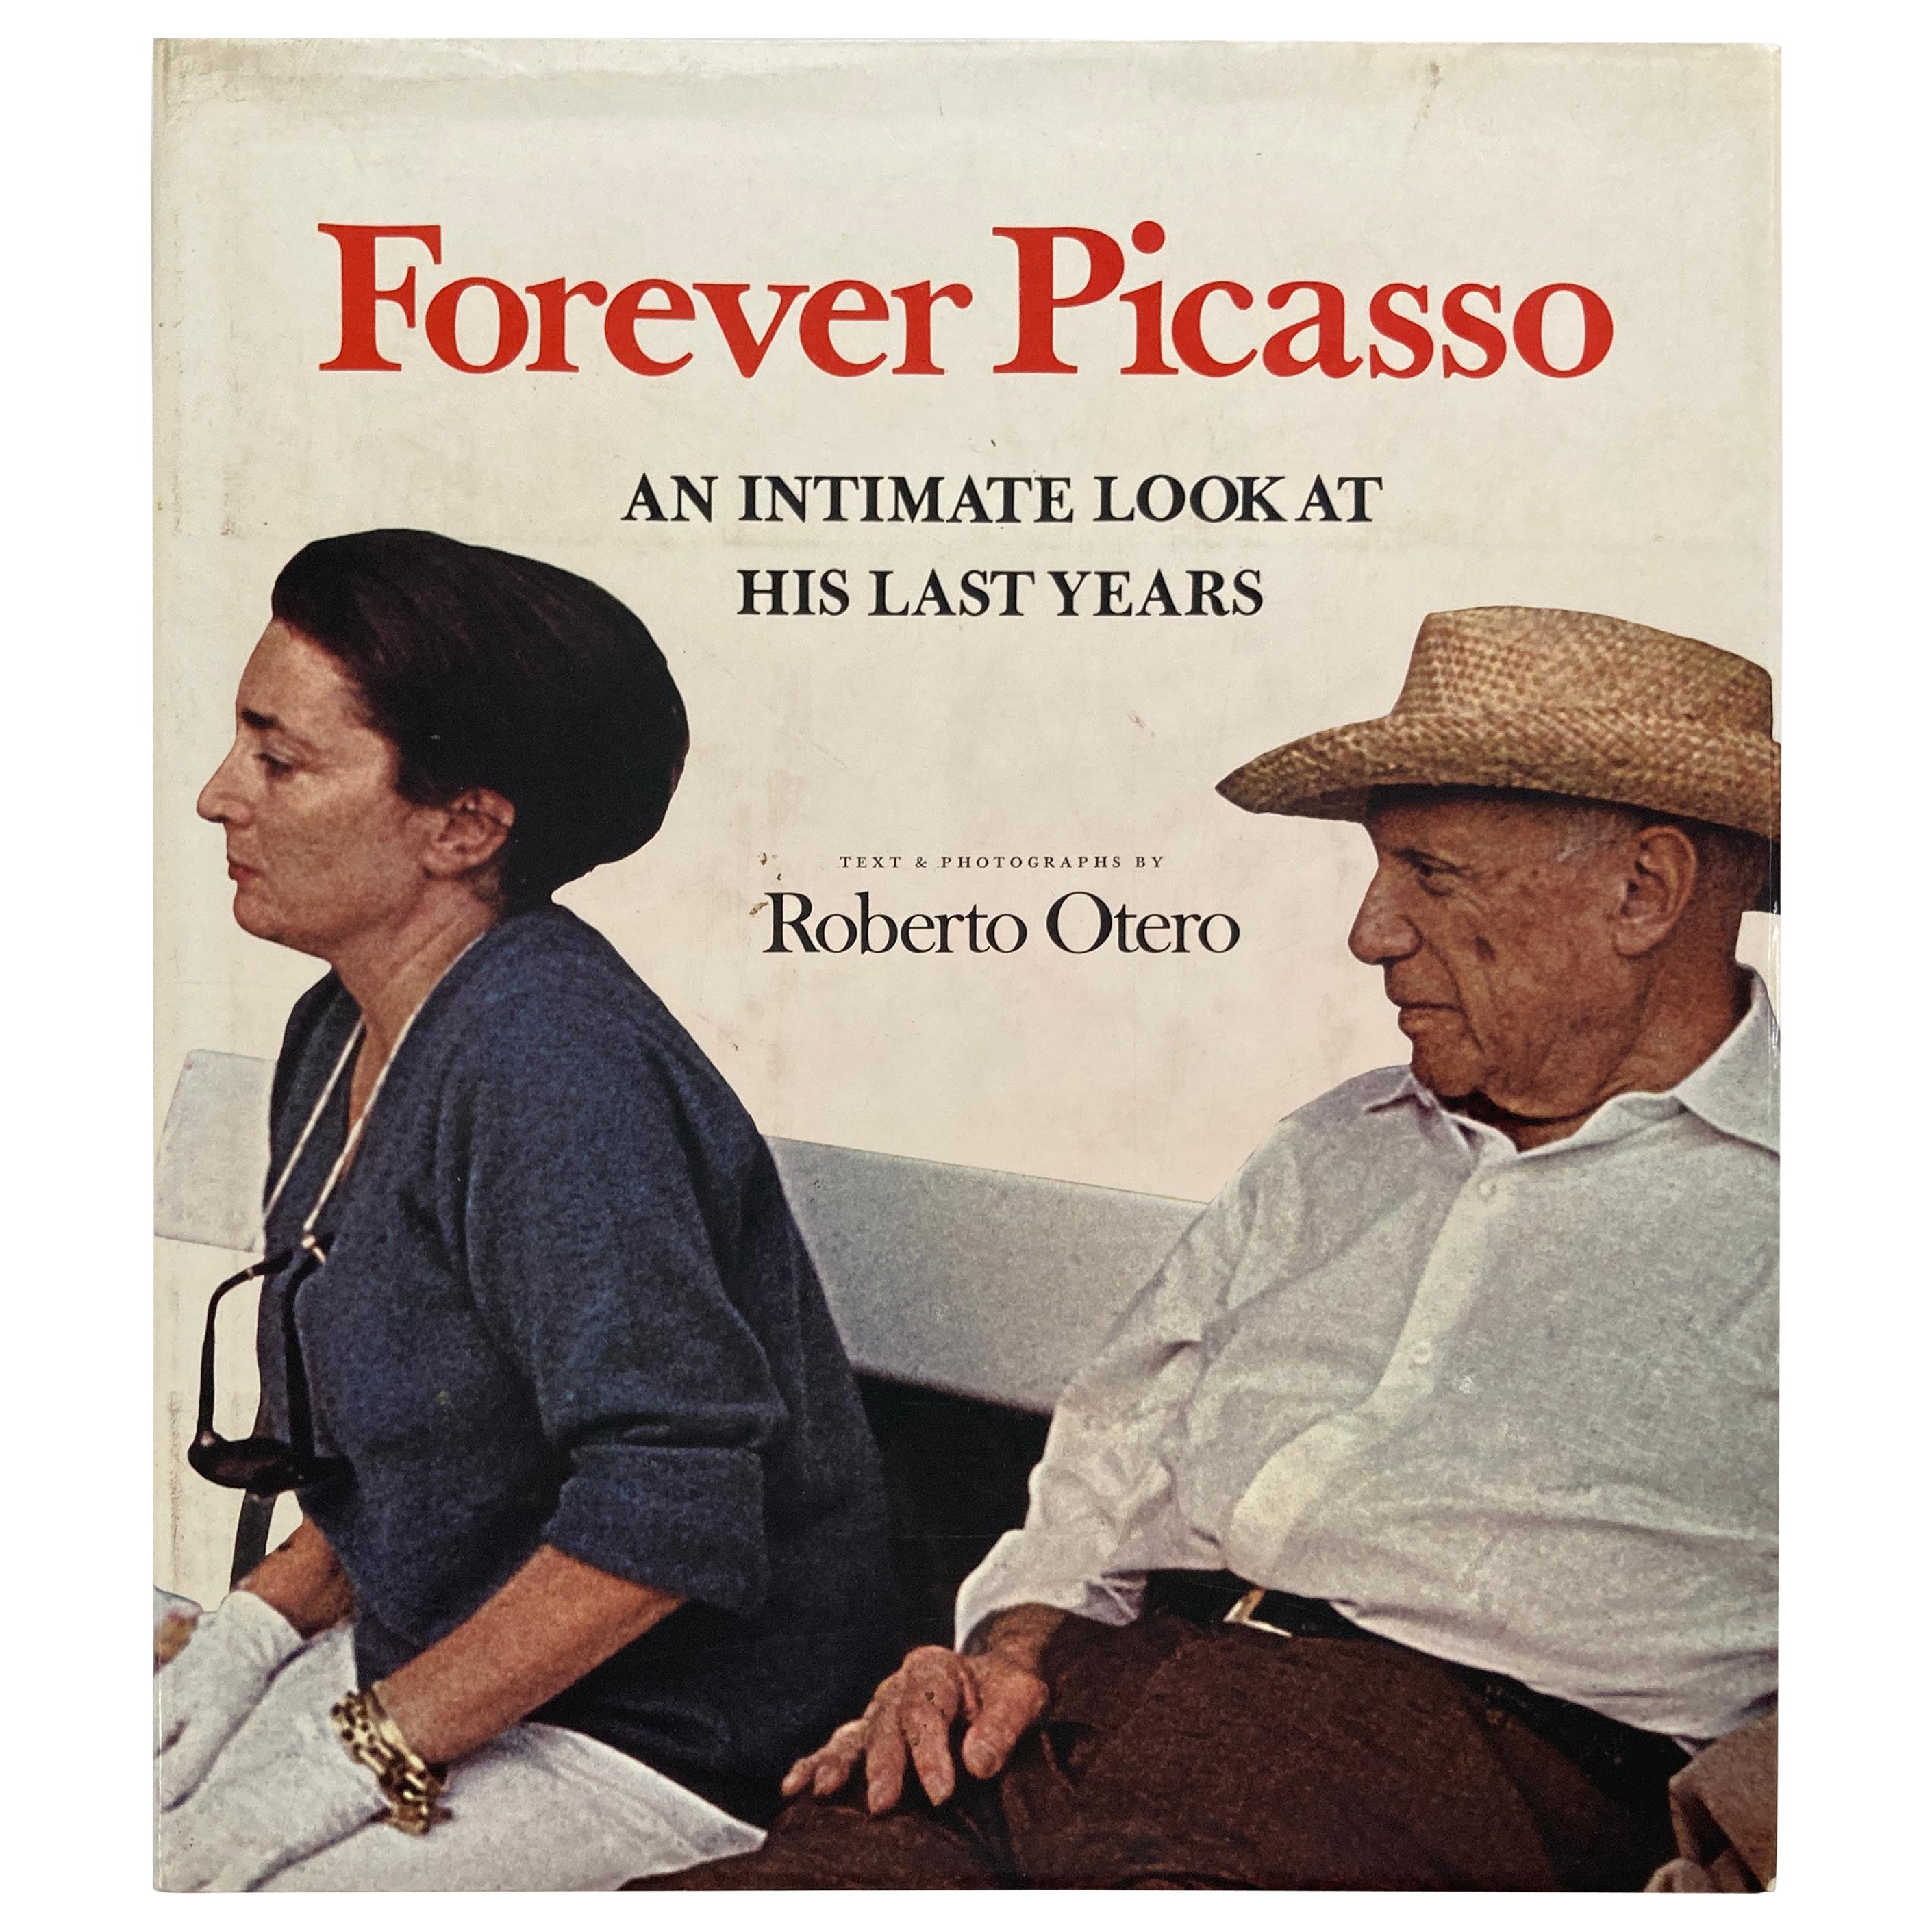 Forever Picasso An Intimate Look at His Last Years Book by Roberto Otero